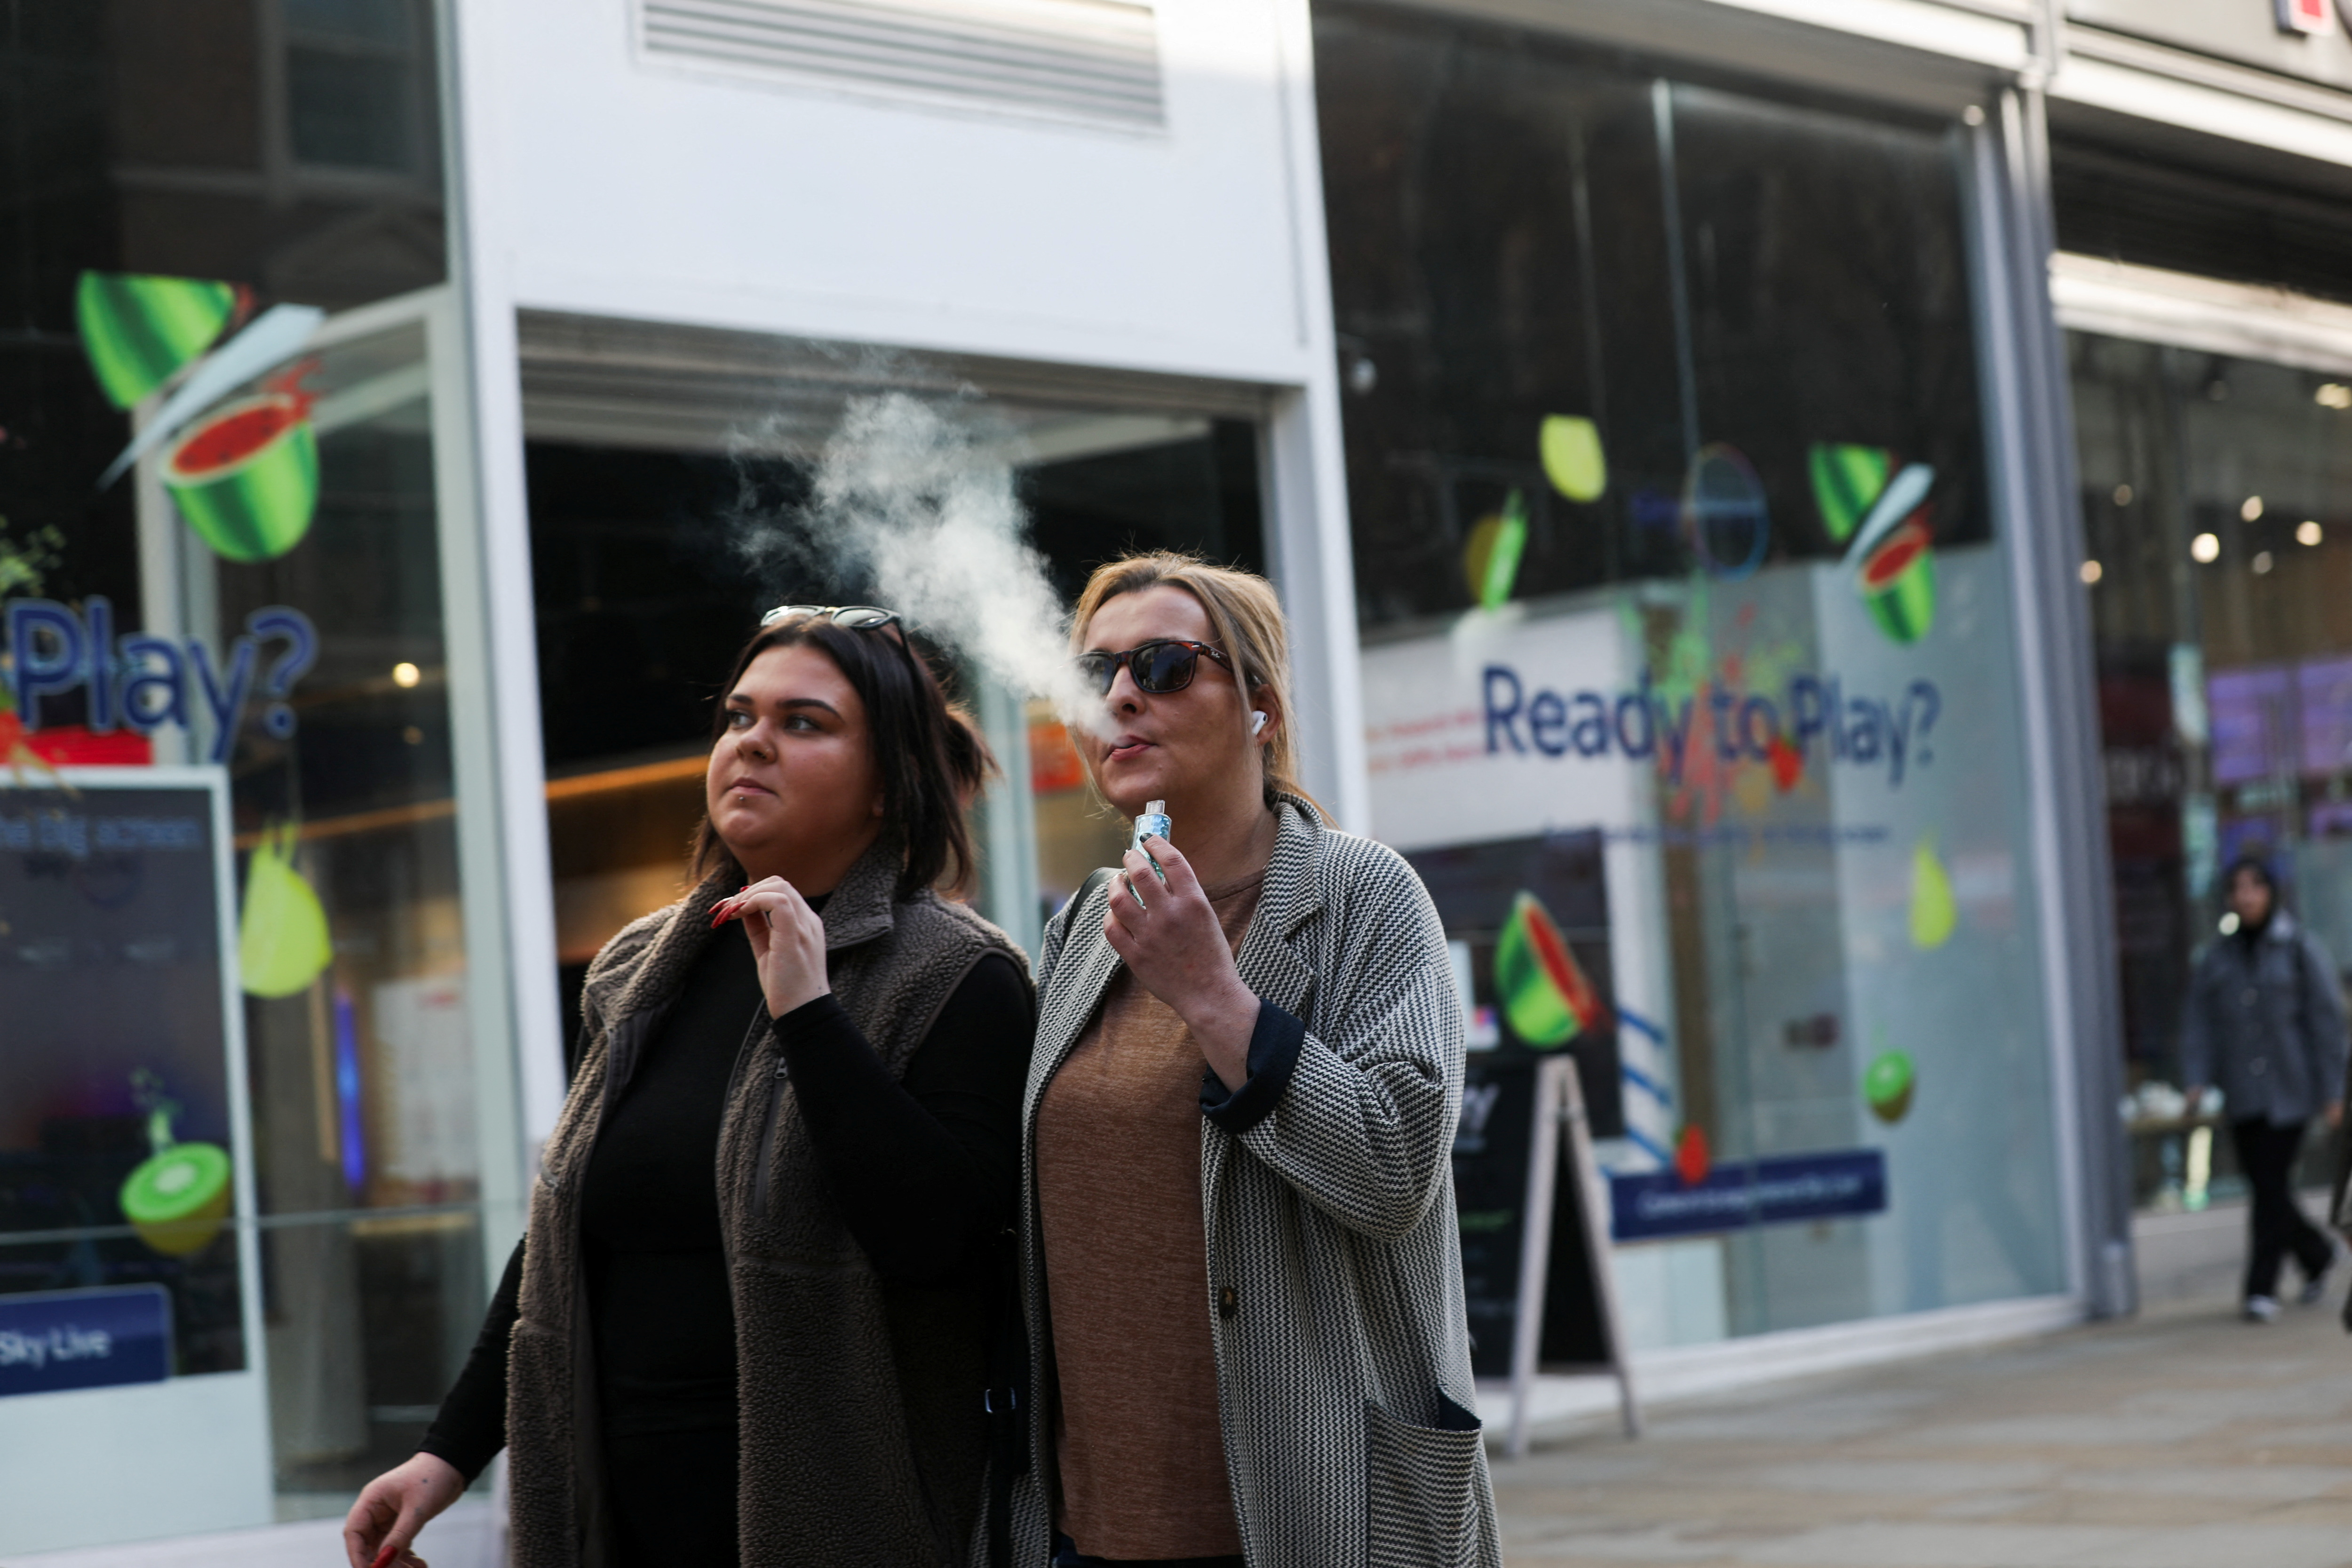 A woman holds an e-cigarette as she vapes on a street in Manchester